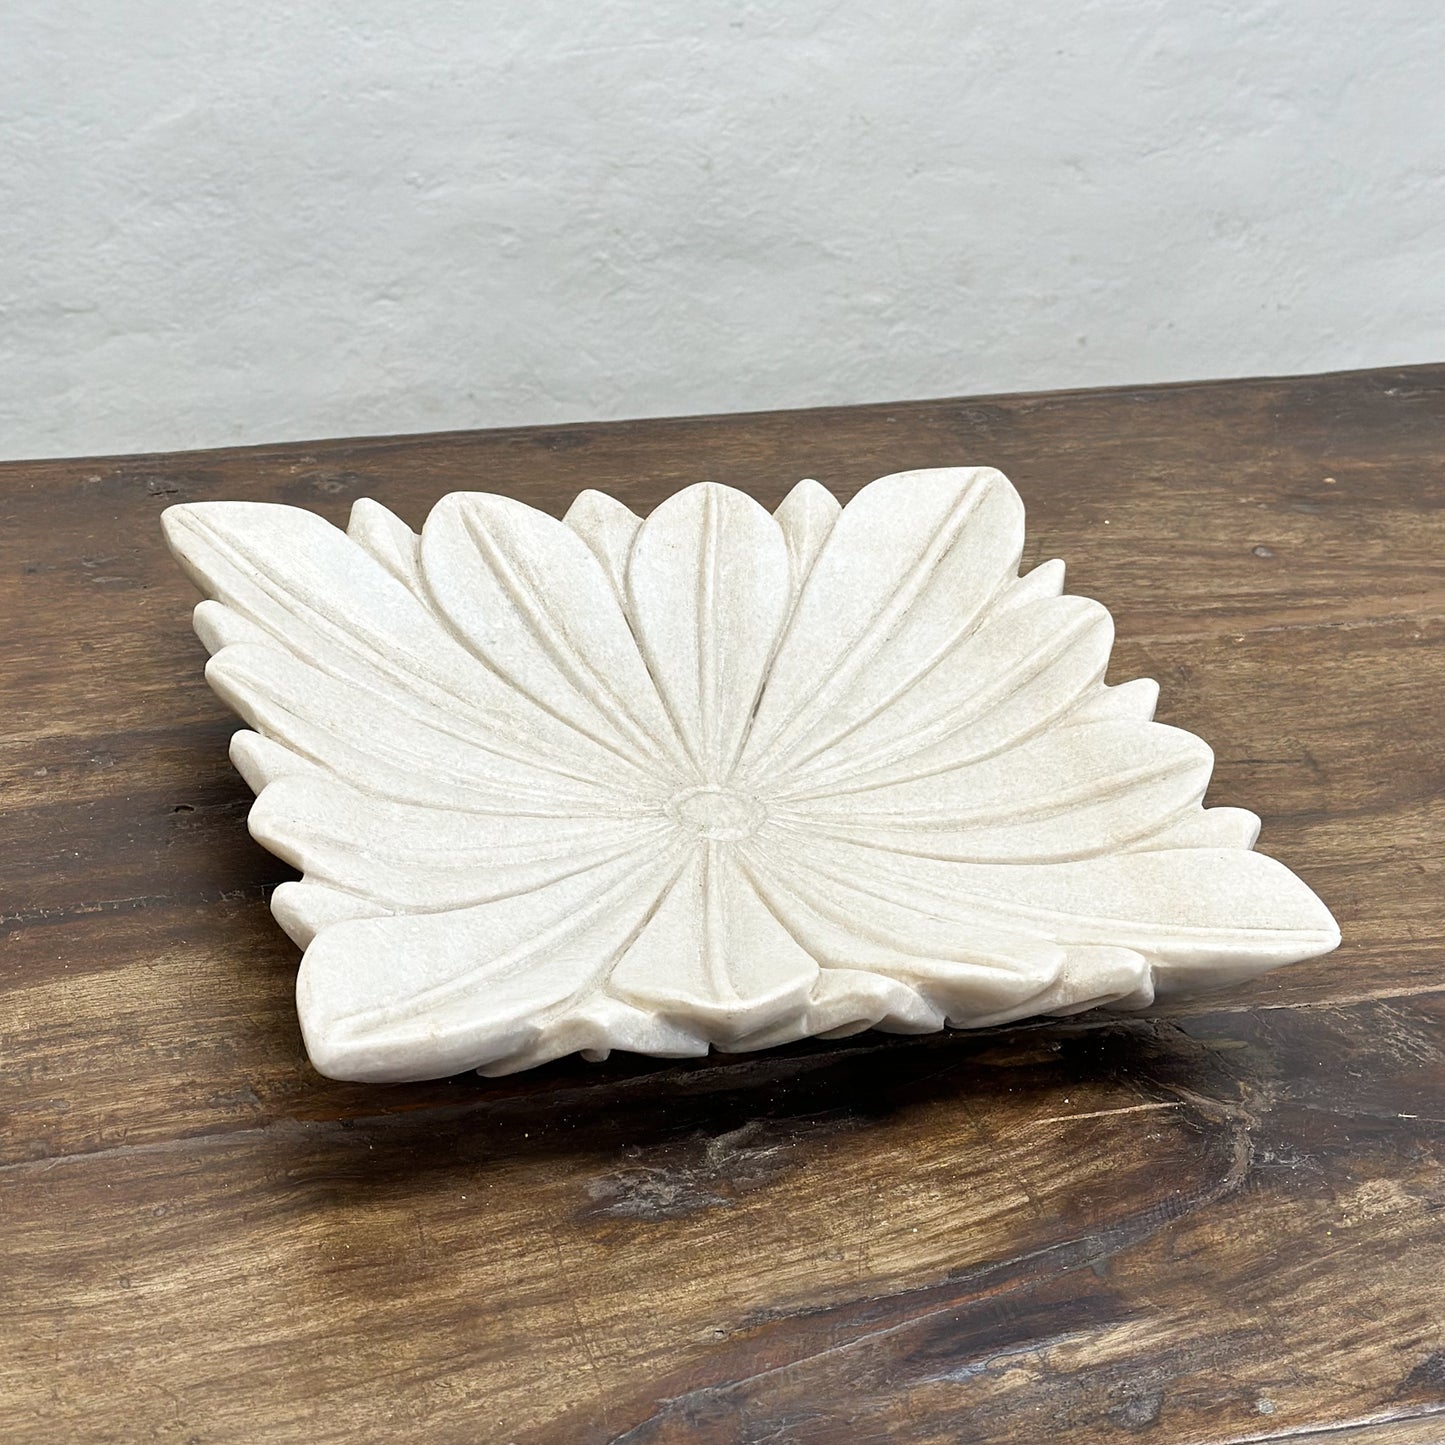 Square-Indian-Floral-Flower-Carved-Marble-Plate-Dish_5_1866a276-018c-4955-bc0d-c3e5559365e9